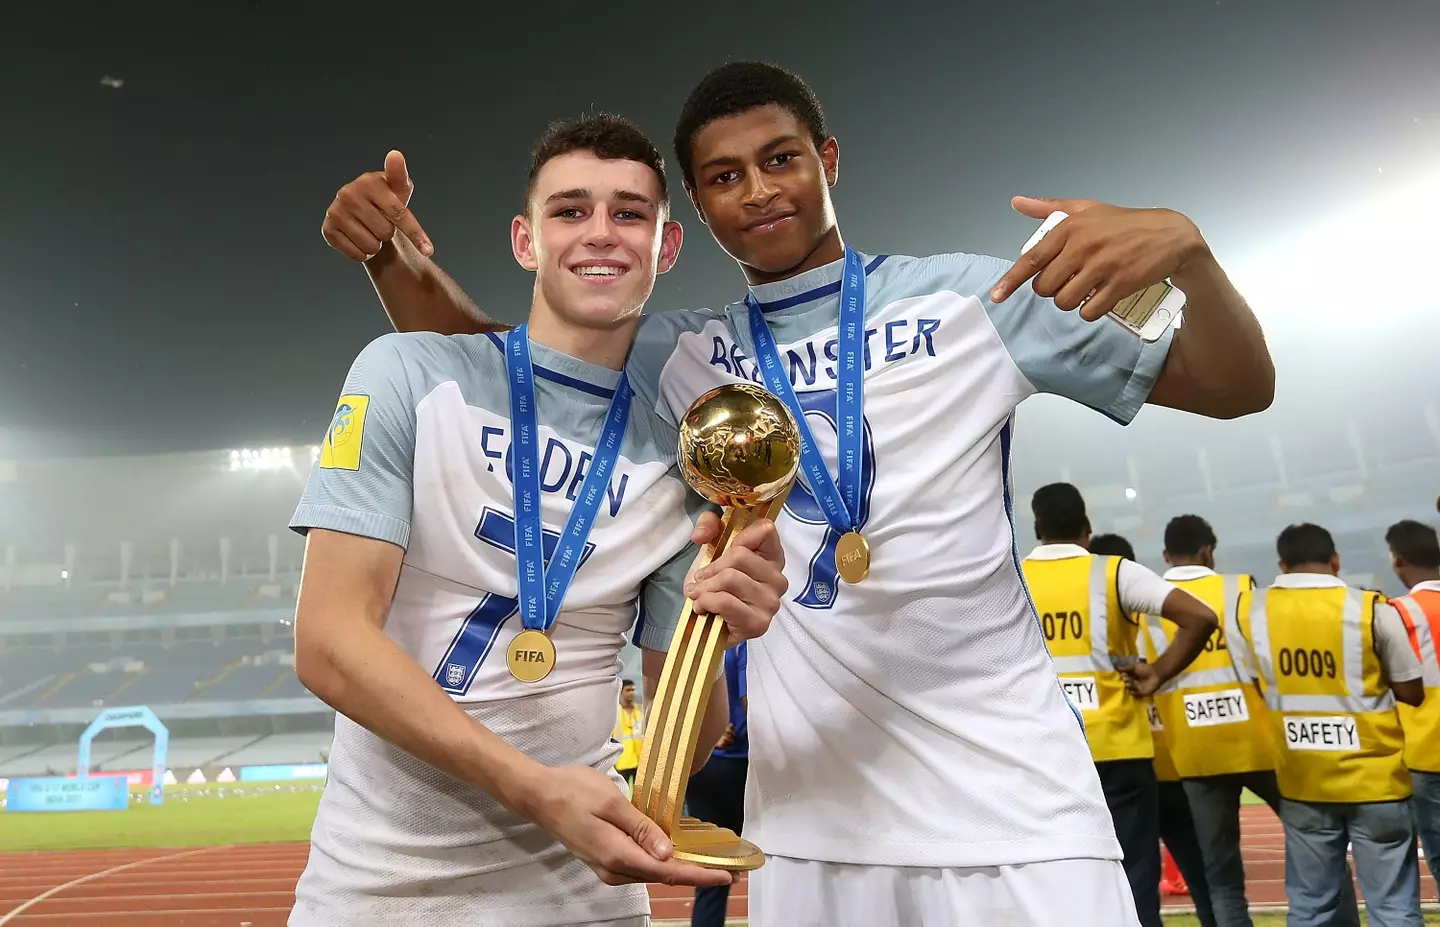 Foden and Brewster pictured during the tournament. (Image